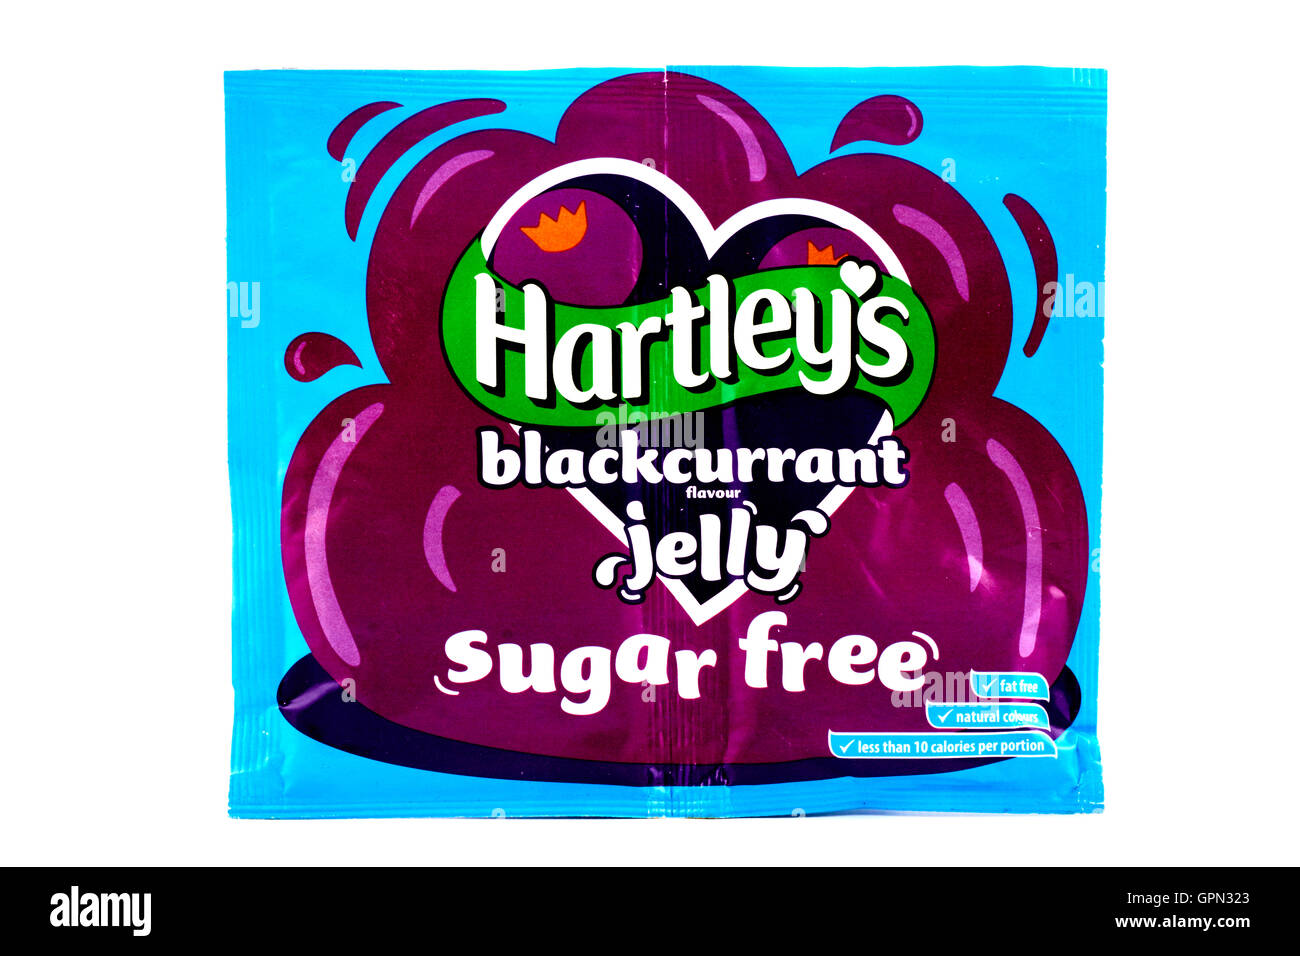 Hartley's Blackcurrant Flavour Sugar Free Jelly Stock Photo